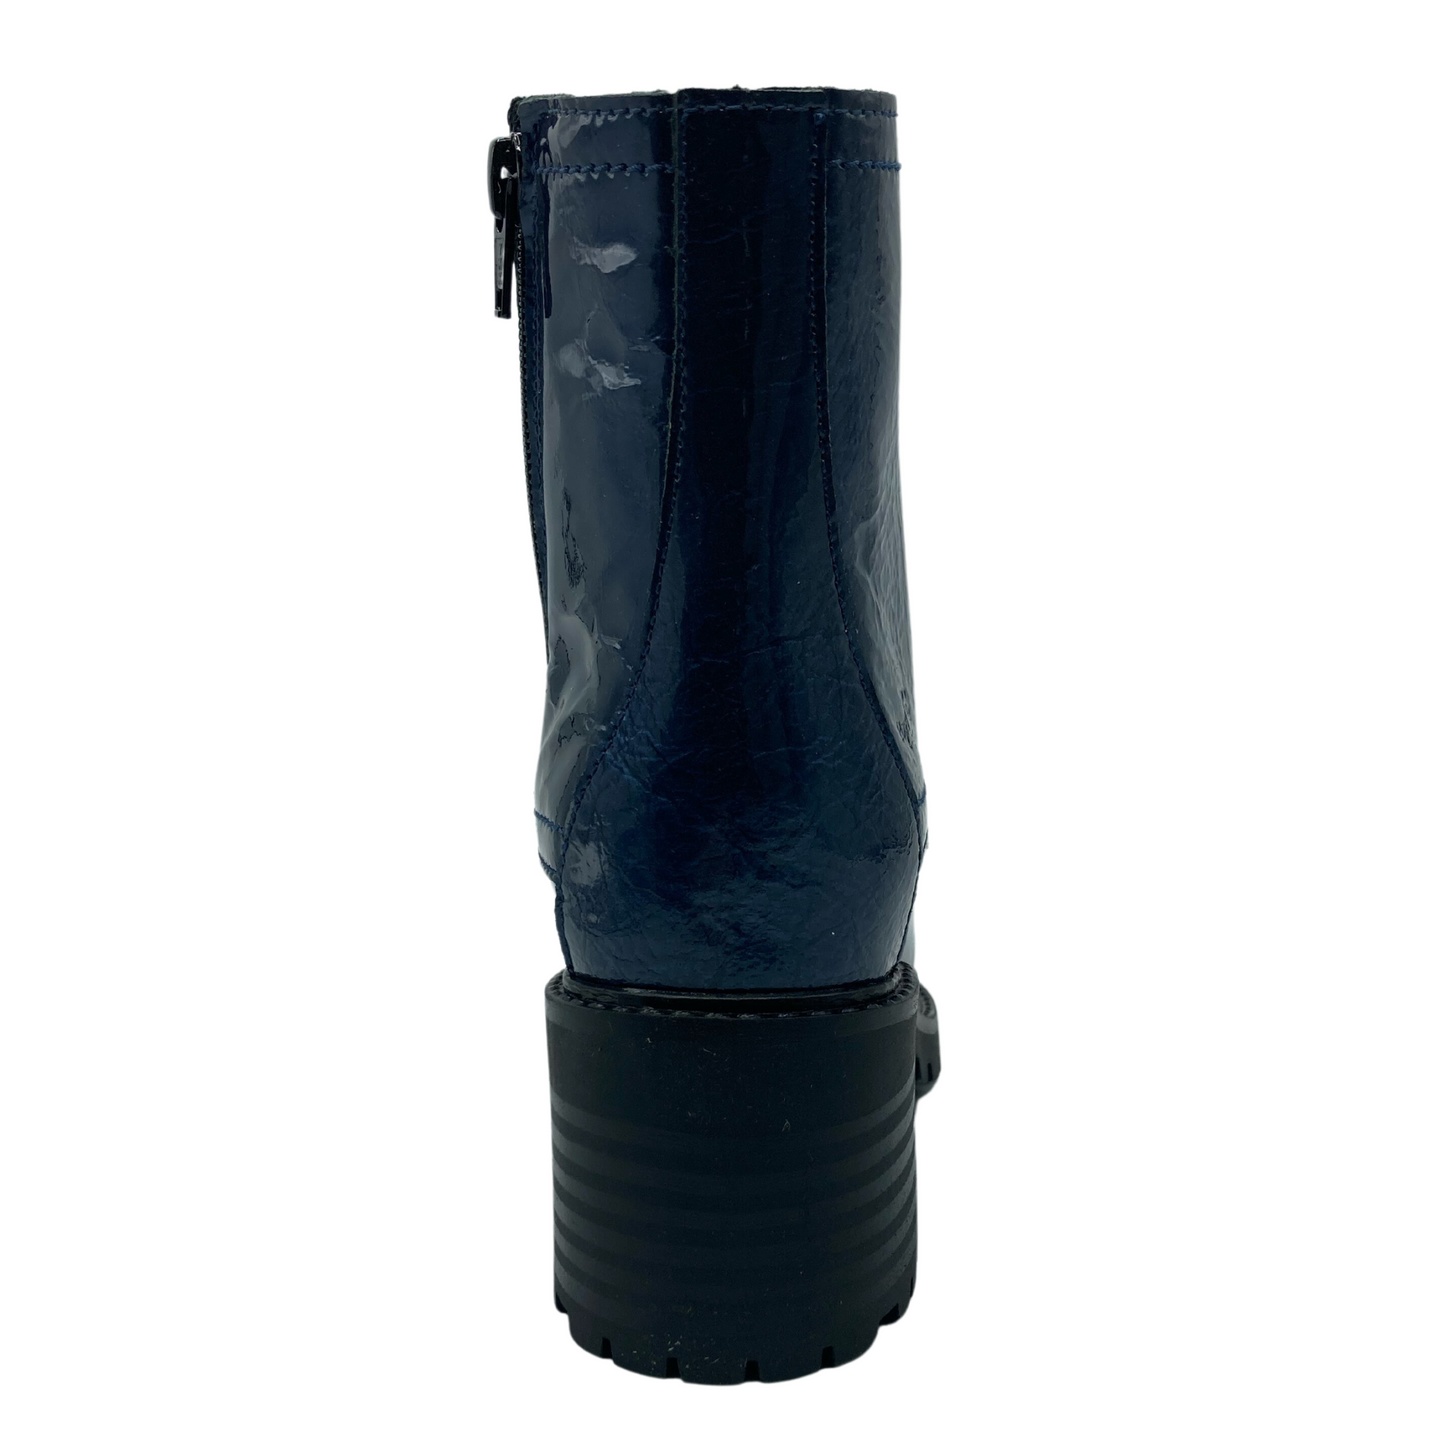 Back view of blue patent leather short boot with black chunky heel